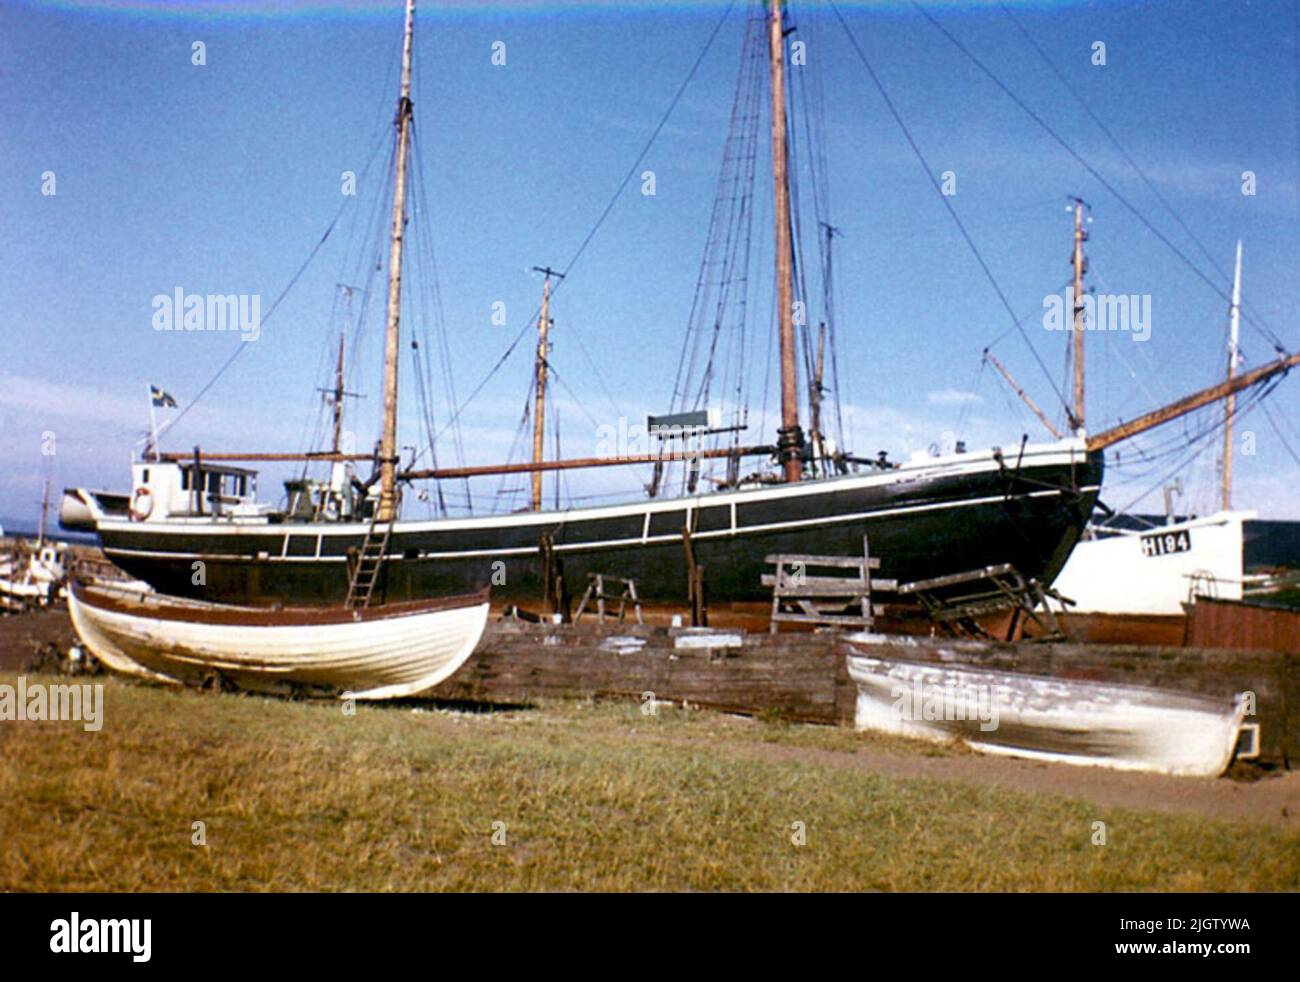 Written on the back: 'Polstjärnan by Motala, Farker Ring Andersen by Svendborg, Bygd by Ring Andersen 1904, Salgt Hit 1916, now redeemed to houseboat. 202/8' Photo of a ship in port. In the foreground, some dinghies are on land. Stock Photo